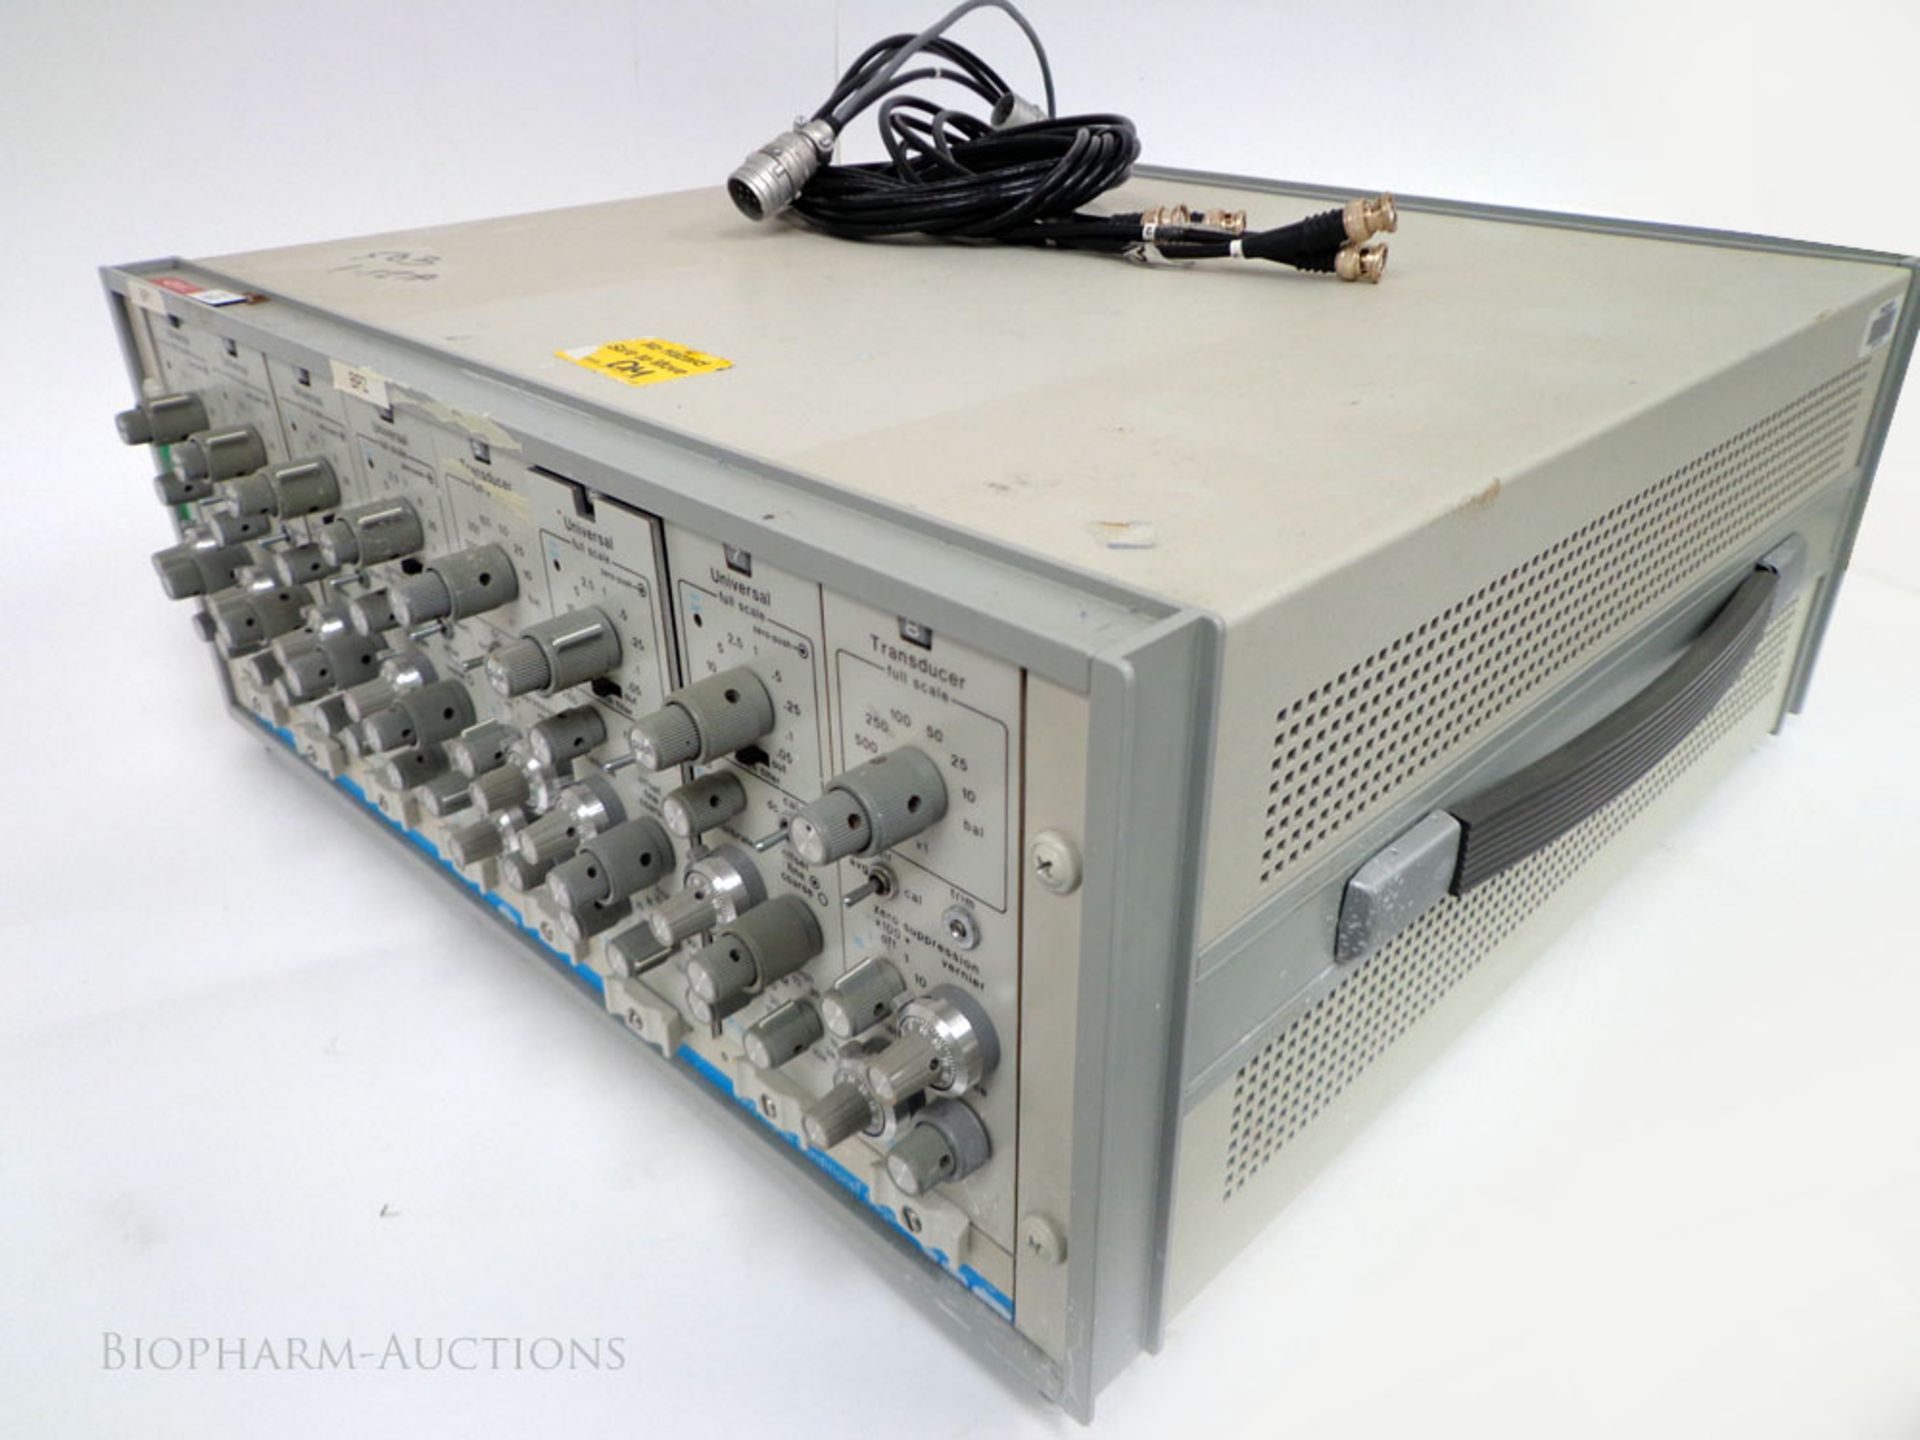 GOULD 5900 Signal Conditioner CageCL-810231-01, S/N 1226. P/N CL-810231-01.